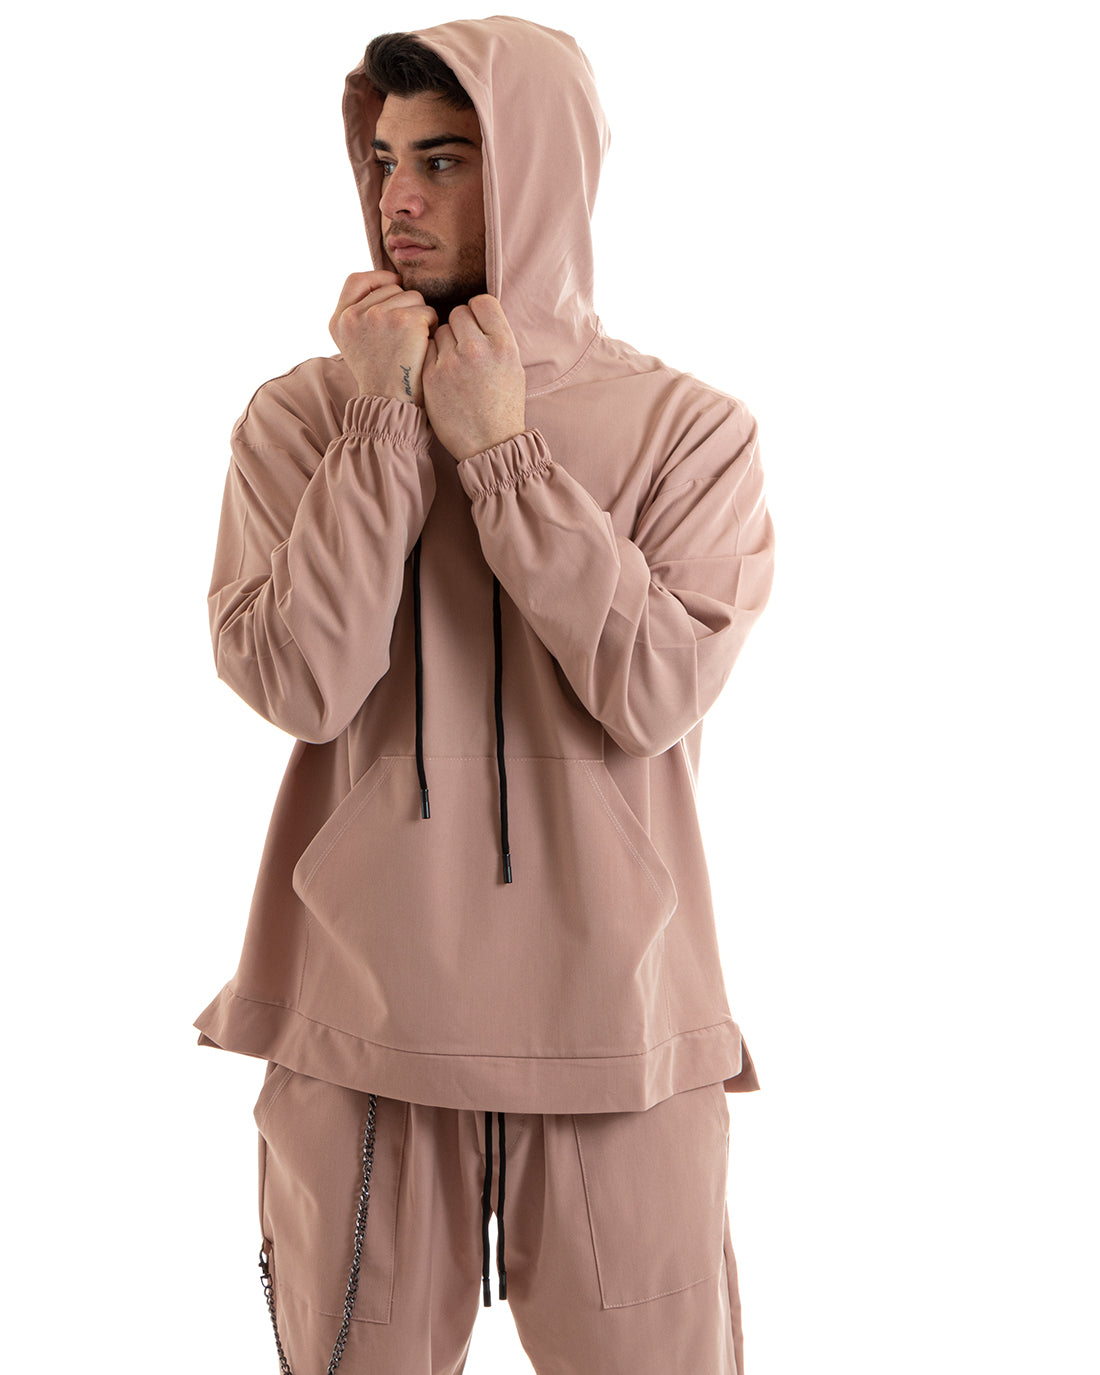 Complete Men's Tracksuit Pink Viscose Relaxed Fit Hooded Sweatshirt Trousers GIOSAL-OU2246A